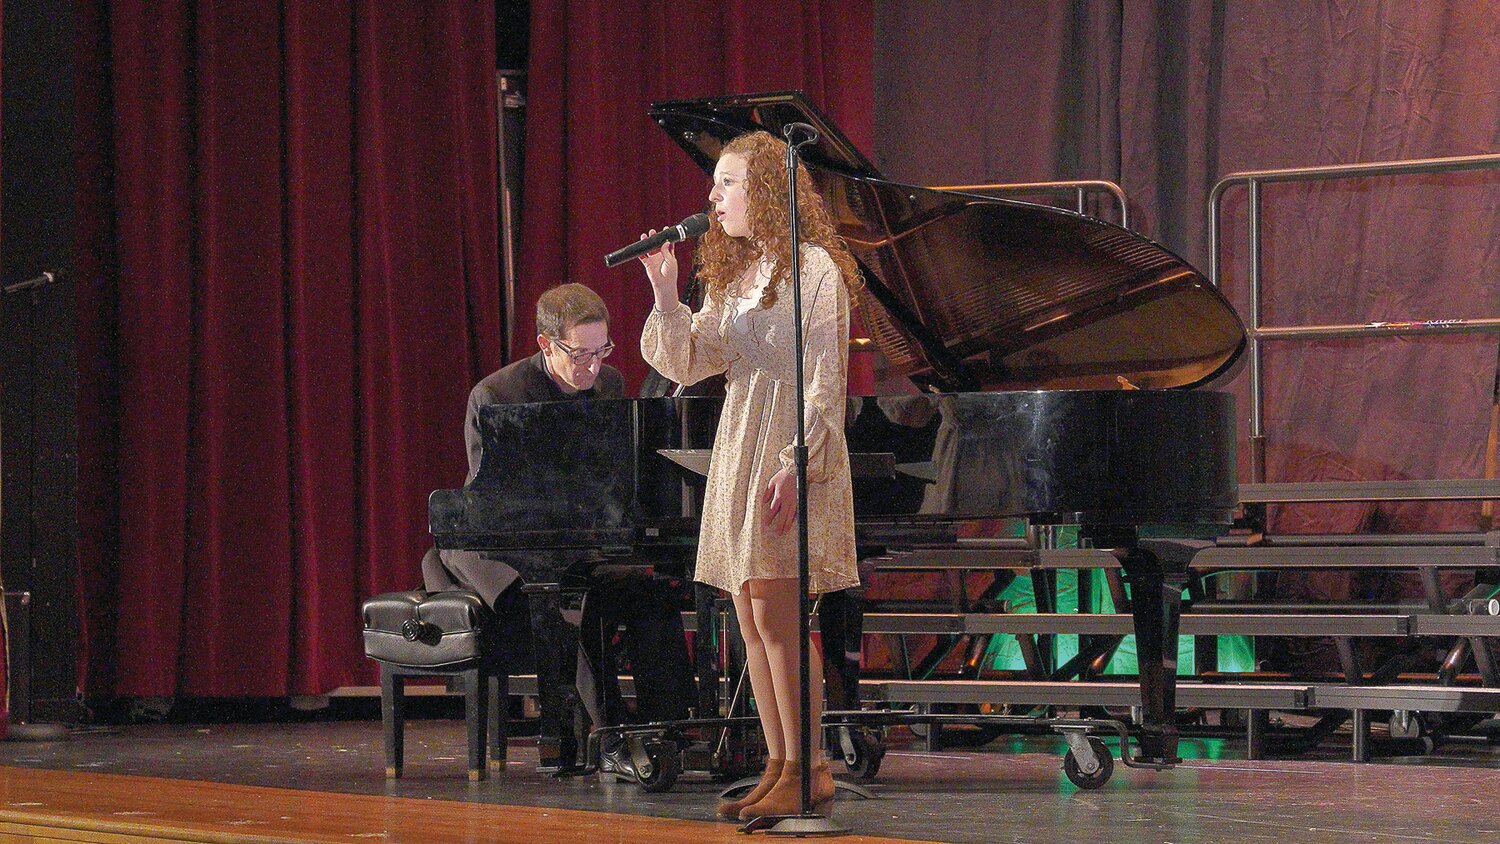 Charlotte Rayner of Chalfont performs “No One is Alone” from Stephen Sondheim's “Into the Woods.”